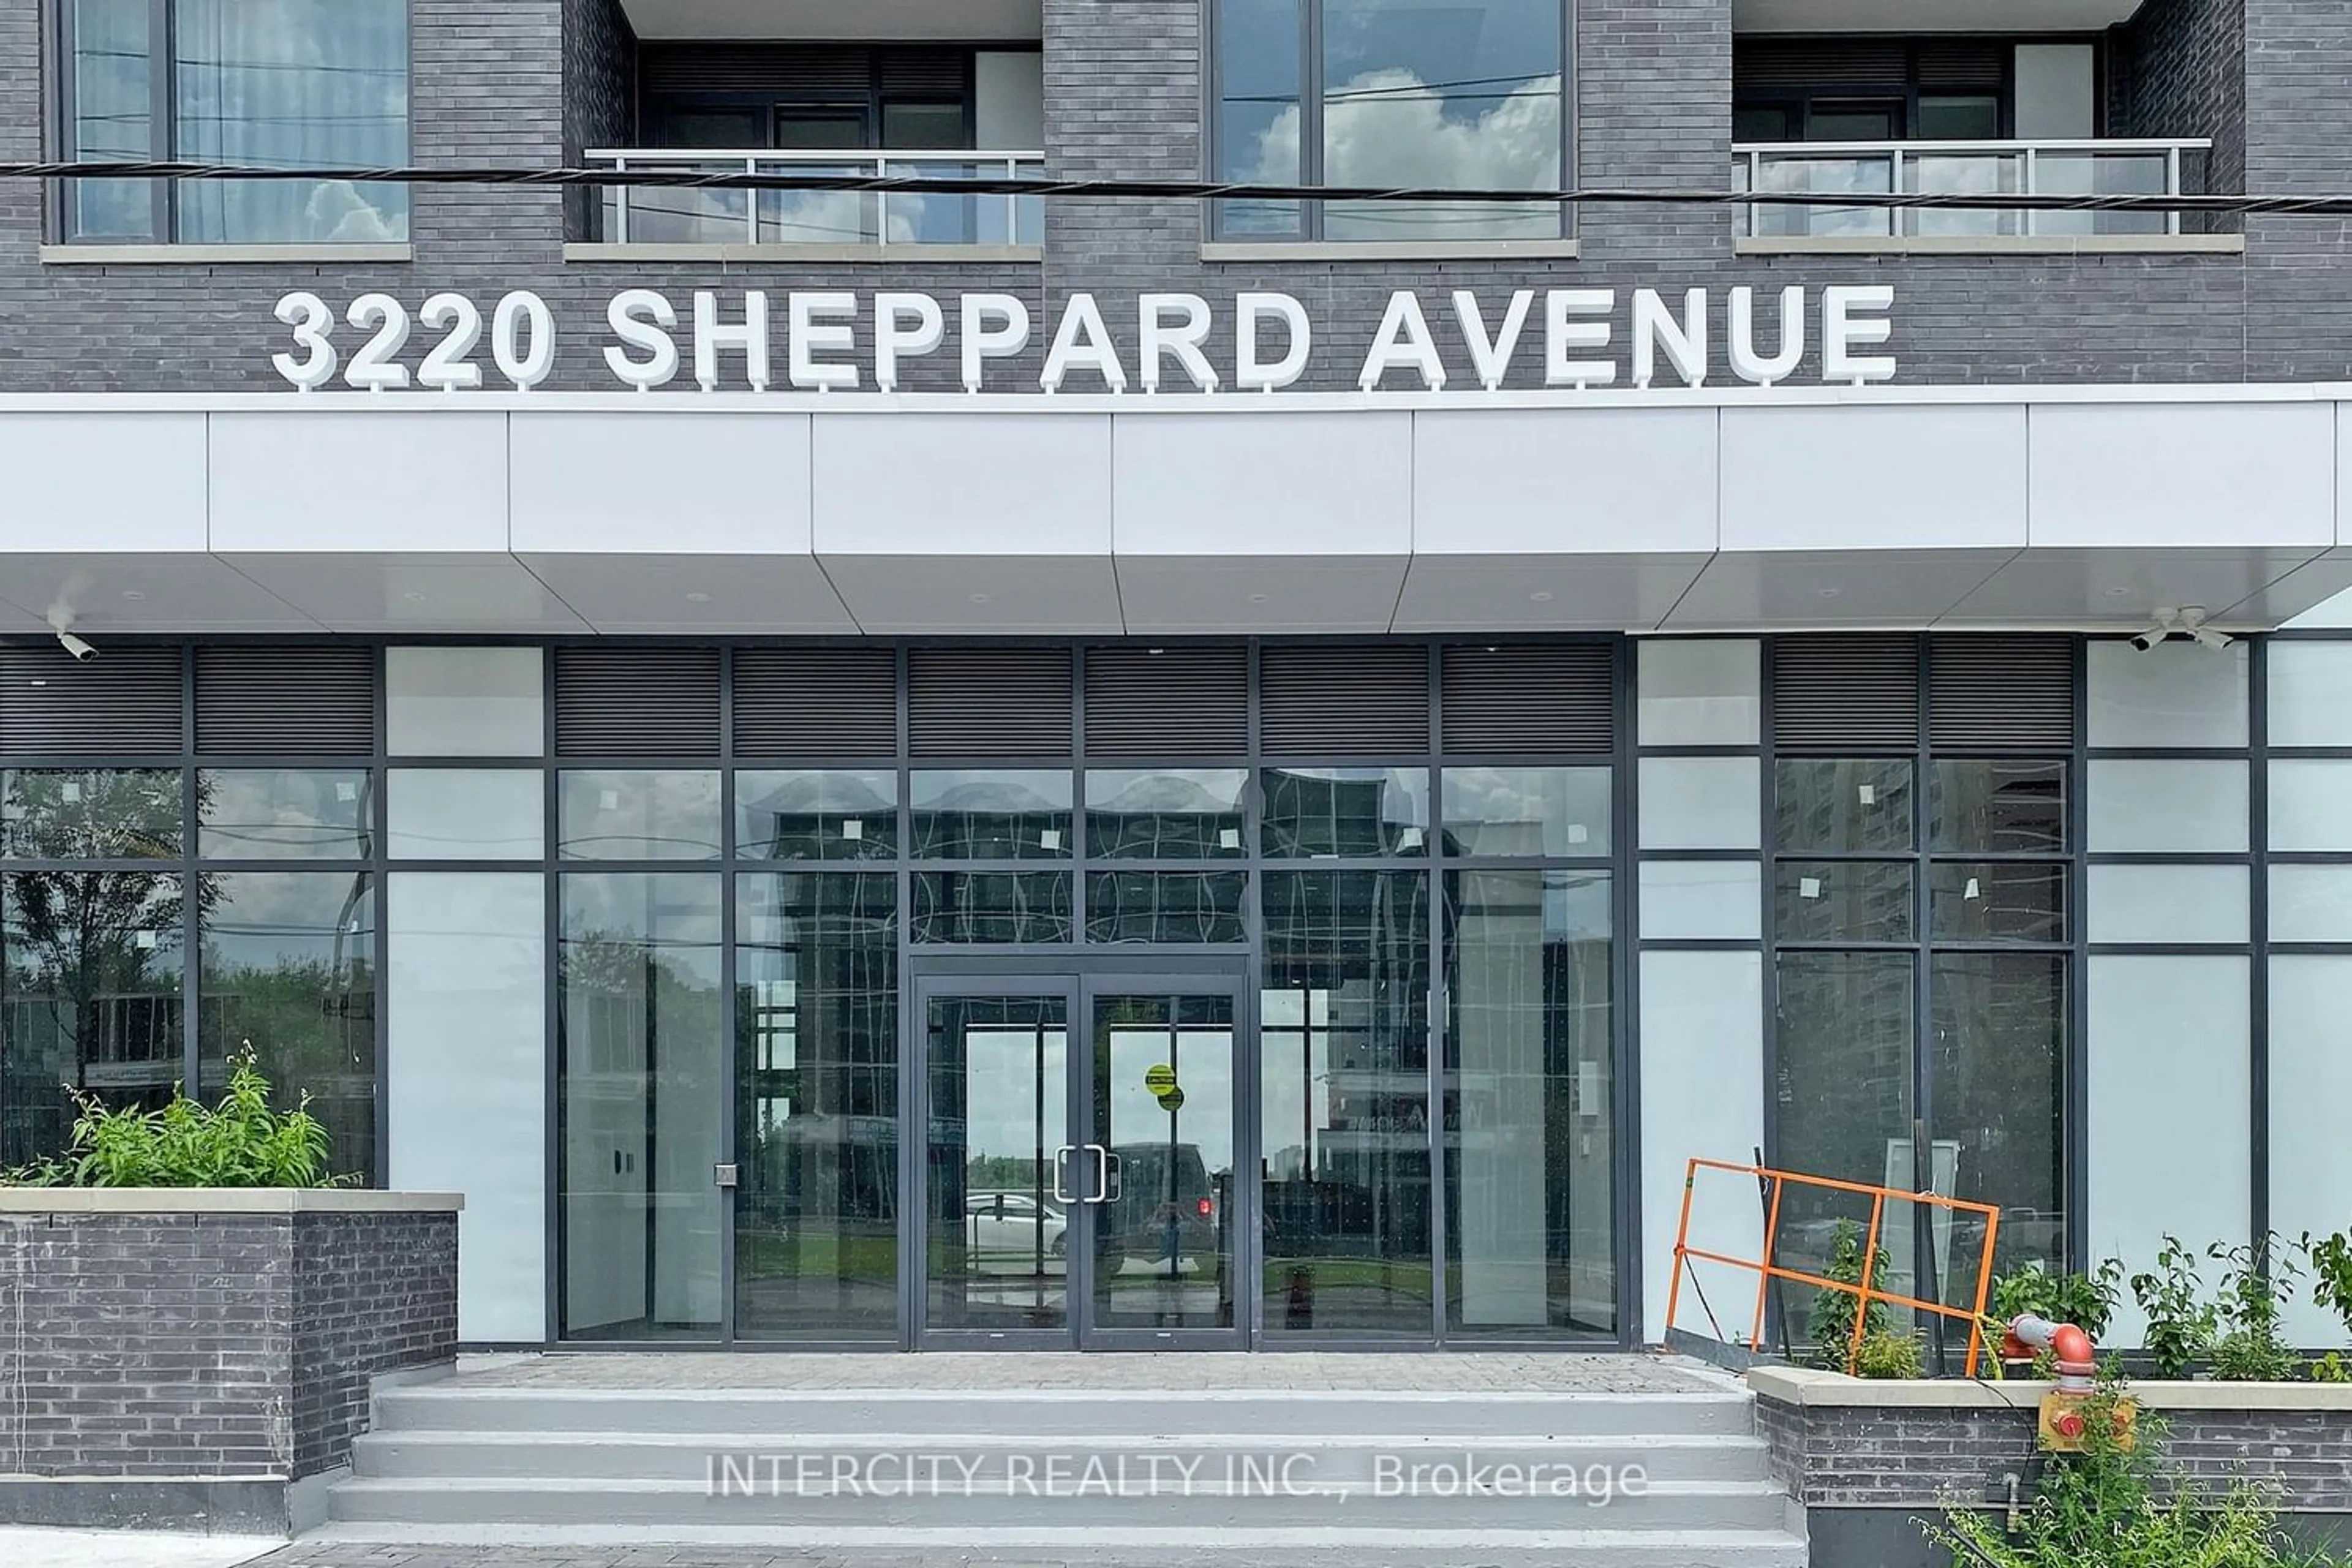 Street view for 3220 Sheppard Ave #1509, Toronto Ontario M1T 0B7